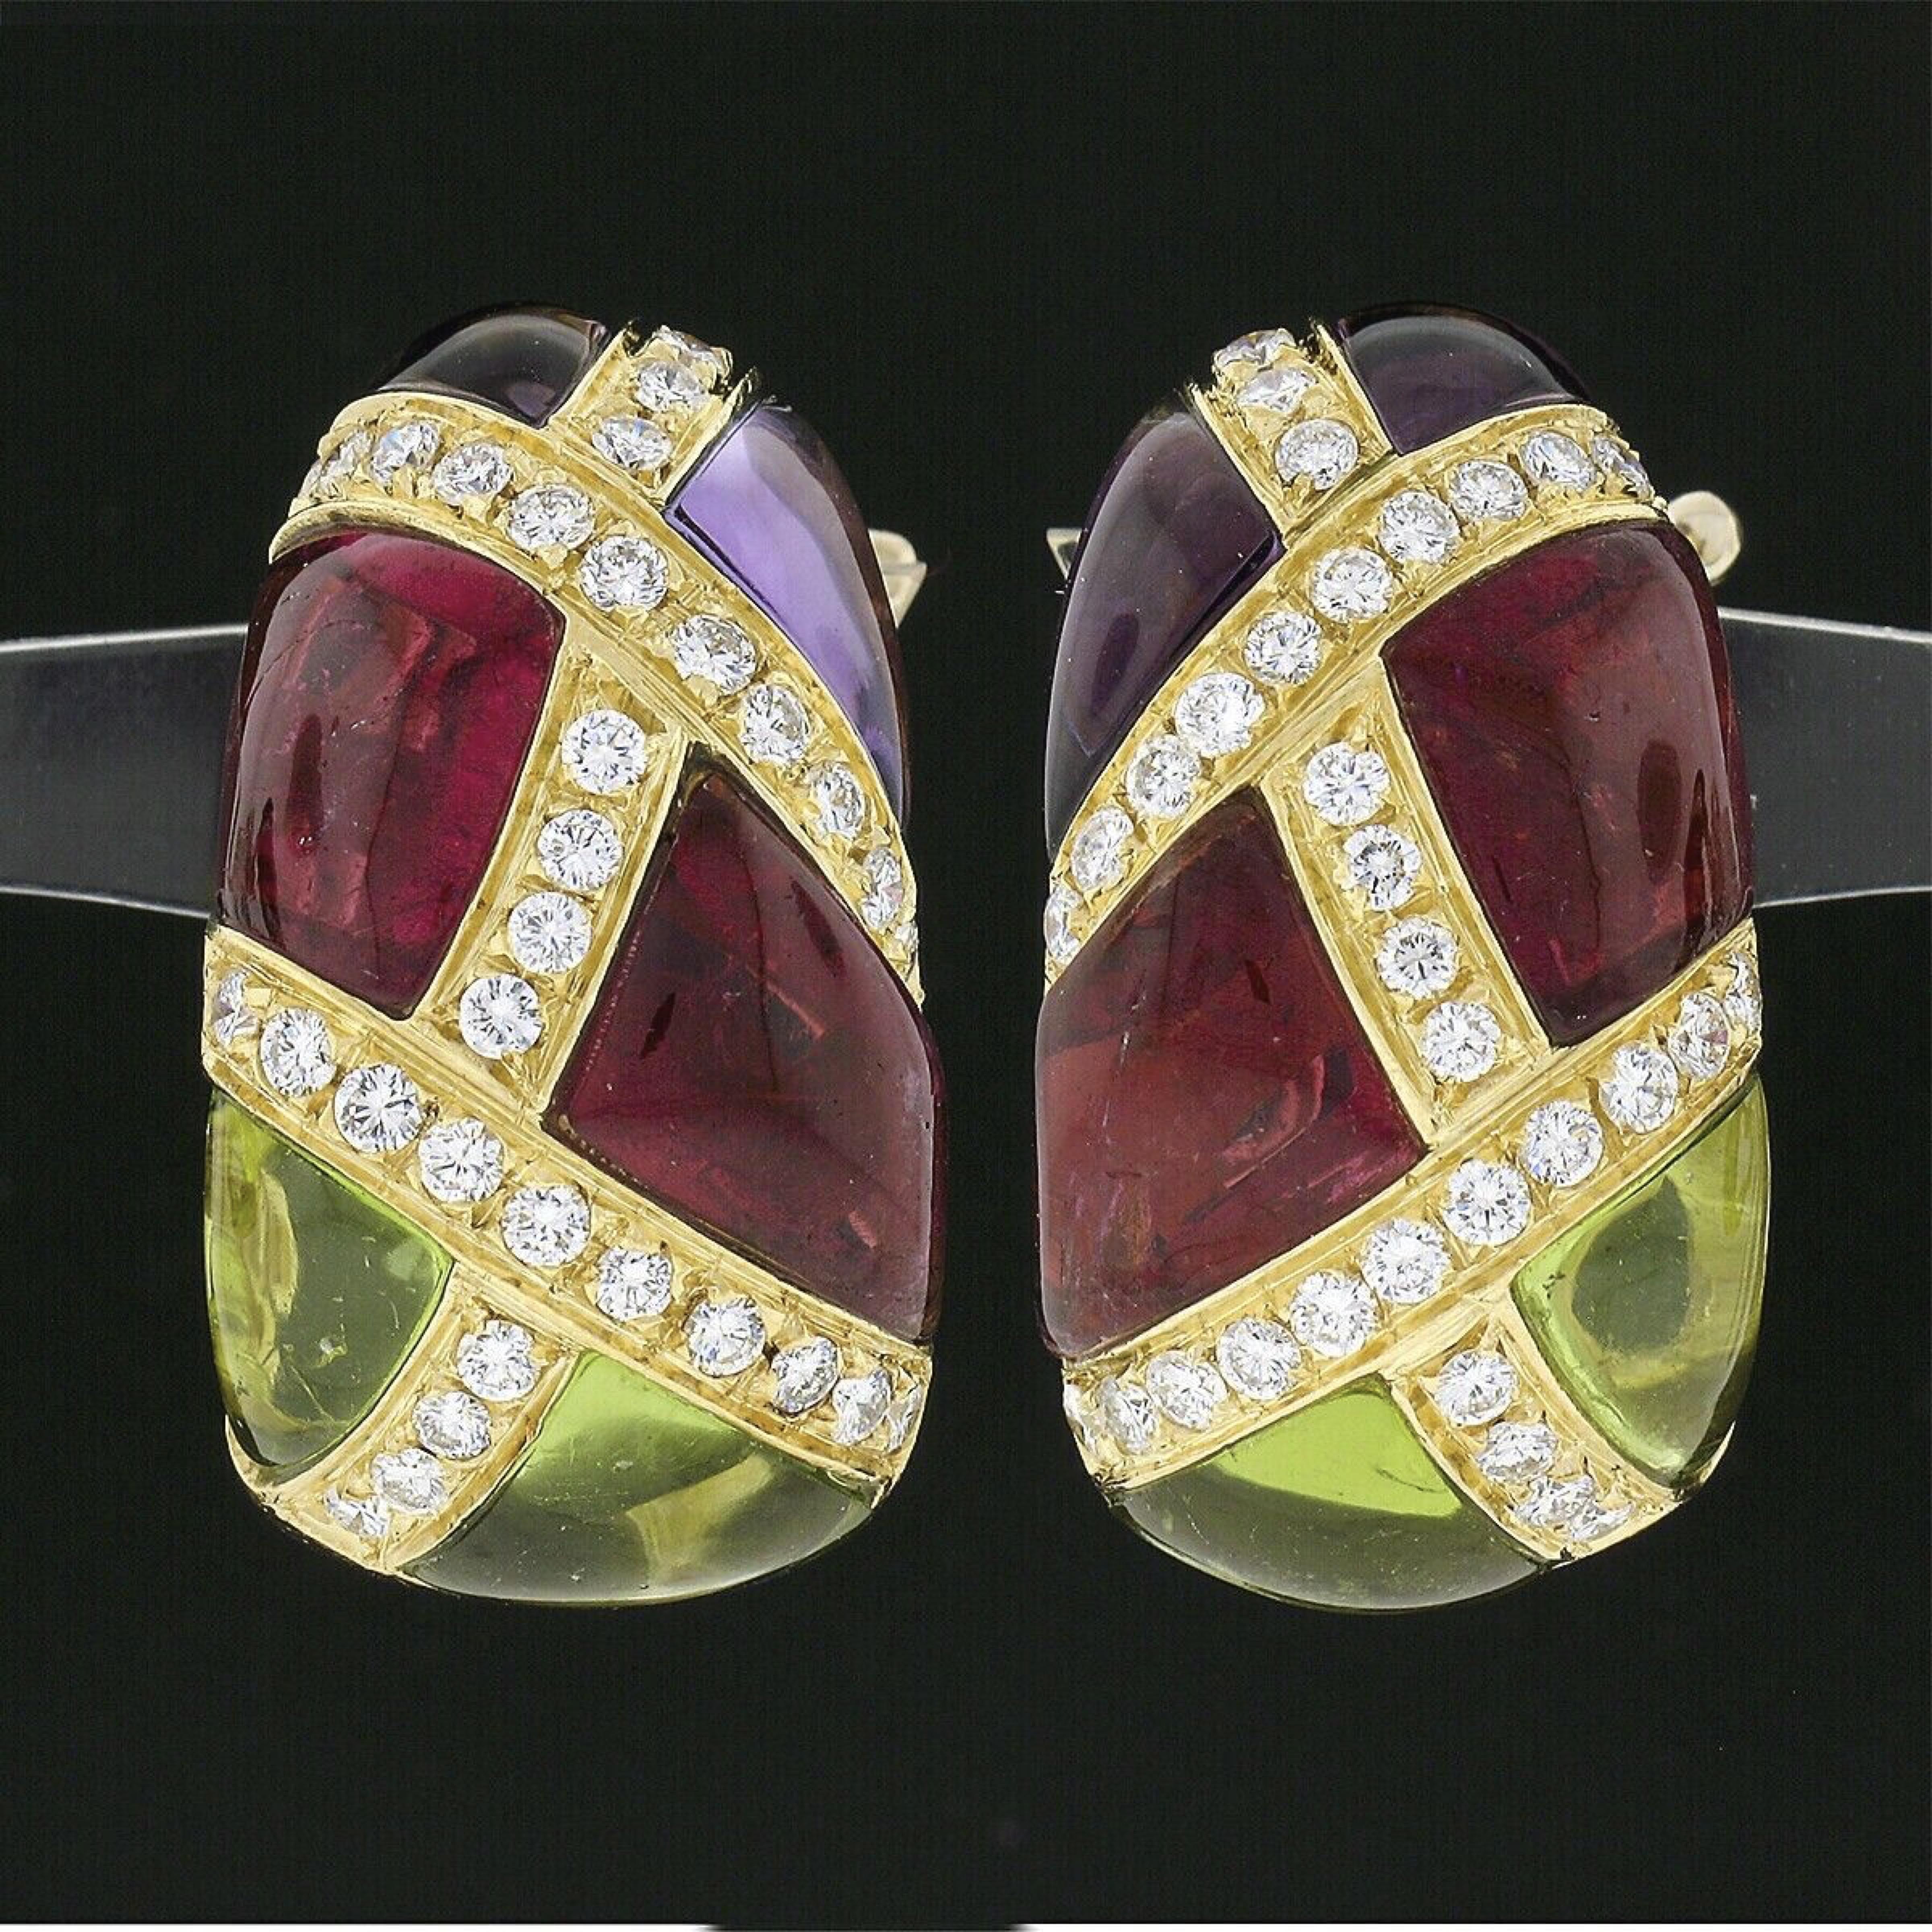 Here we have a truly unique and elegant pair of statement cuff earrings that are designed by Roberto Casarin and crafted from solid 18k yellow gold. These gorgeous earrings feature custom cabochon cut rubellite, amethyst, and peridot stones set